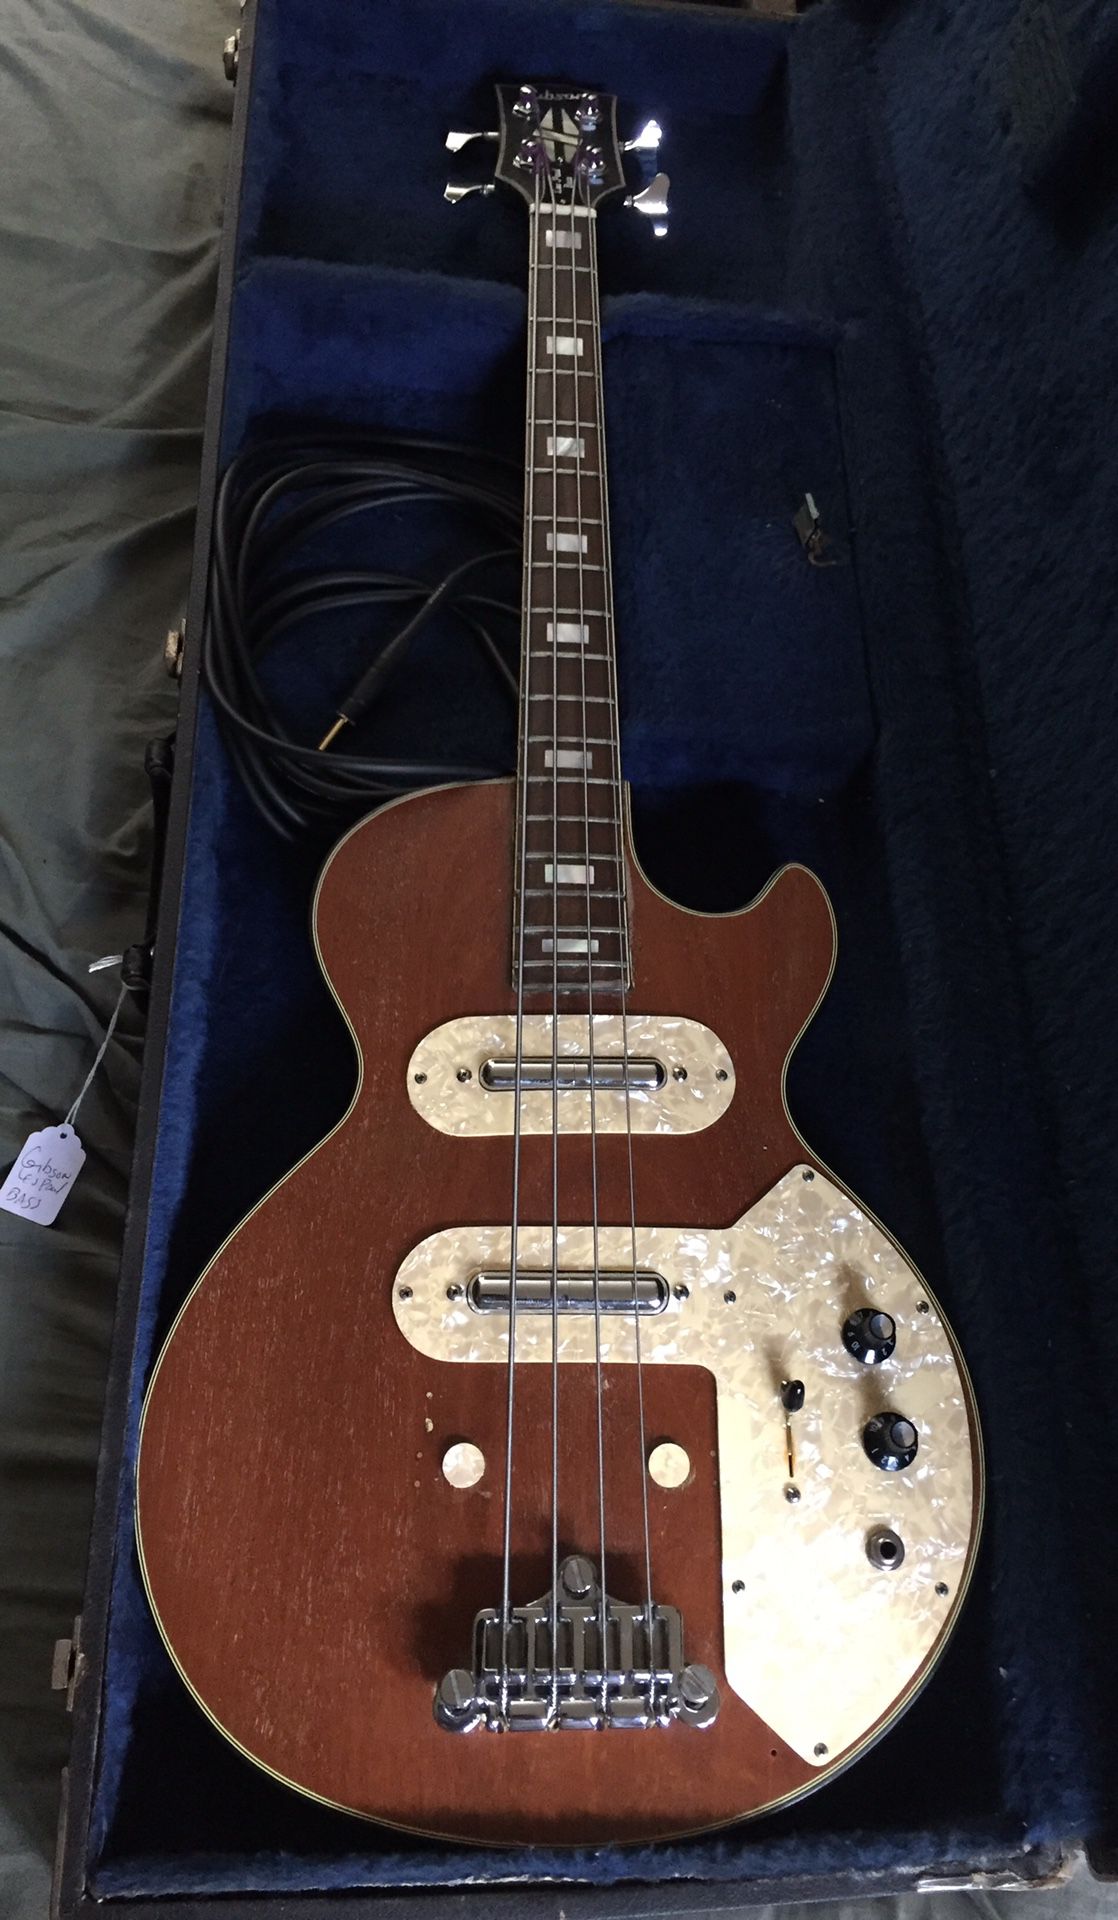 Amazing Custom 1970s Gibson Les Paul (Triumph?) SHORT SCALE Bass- in great condition - PRICE REDUCED - buy now!